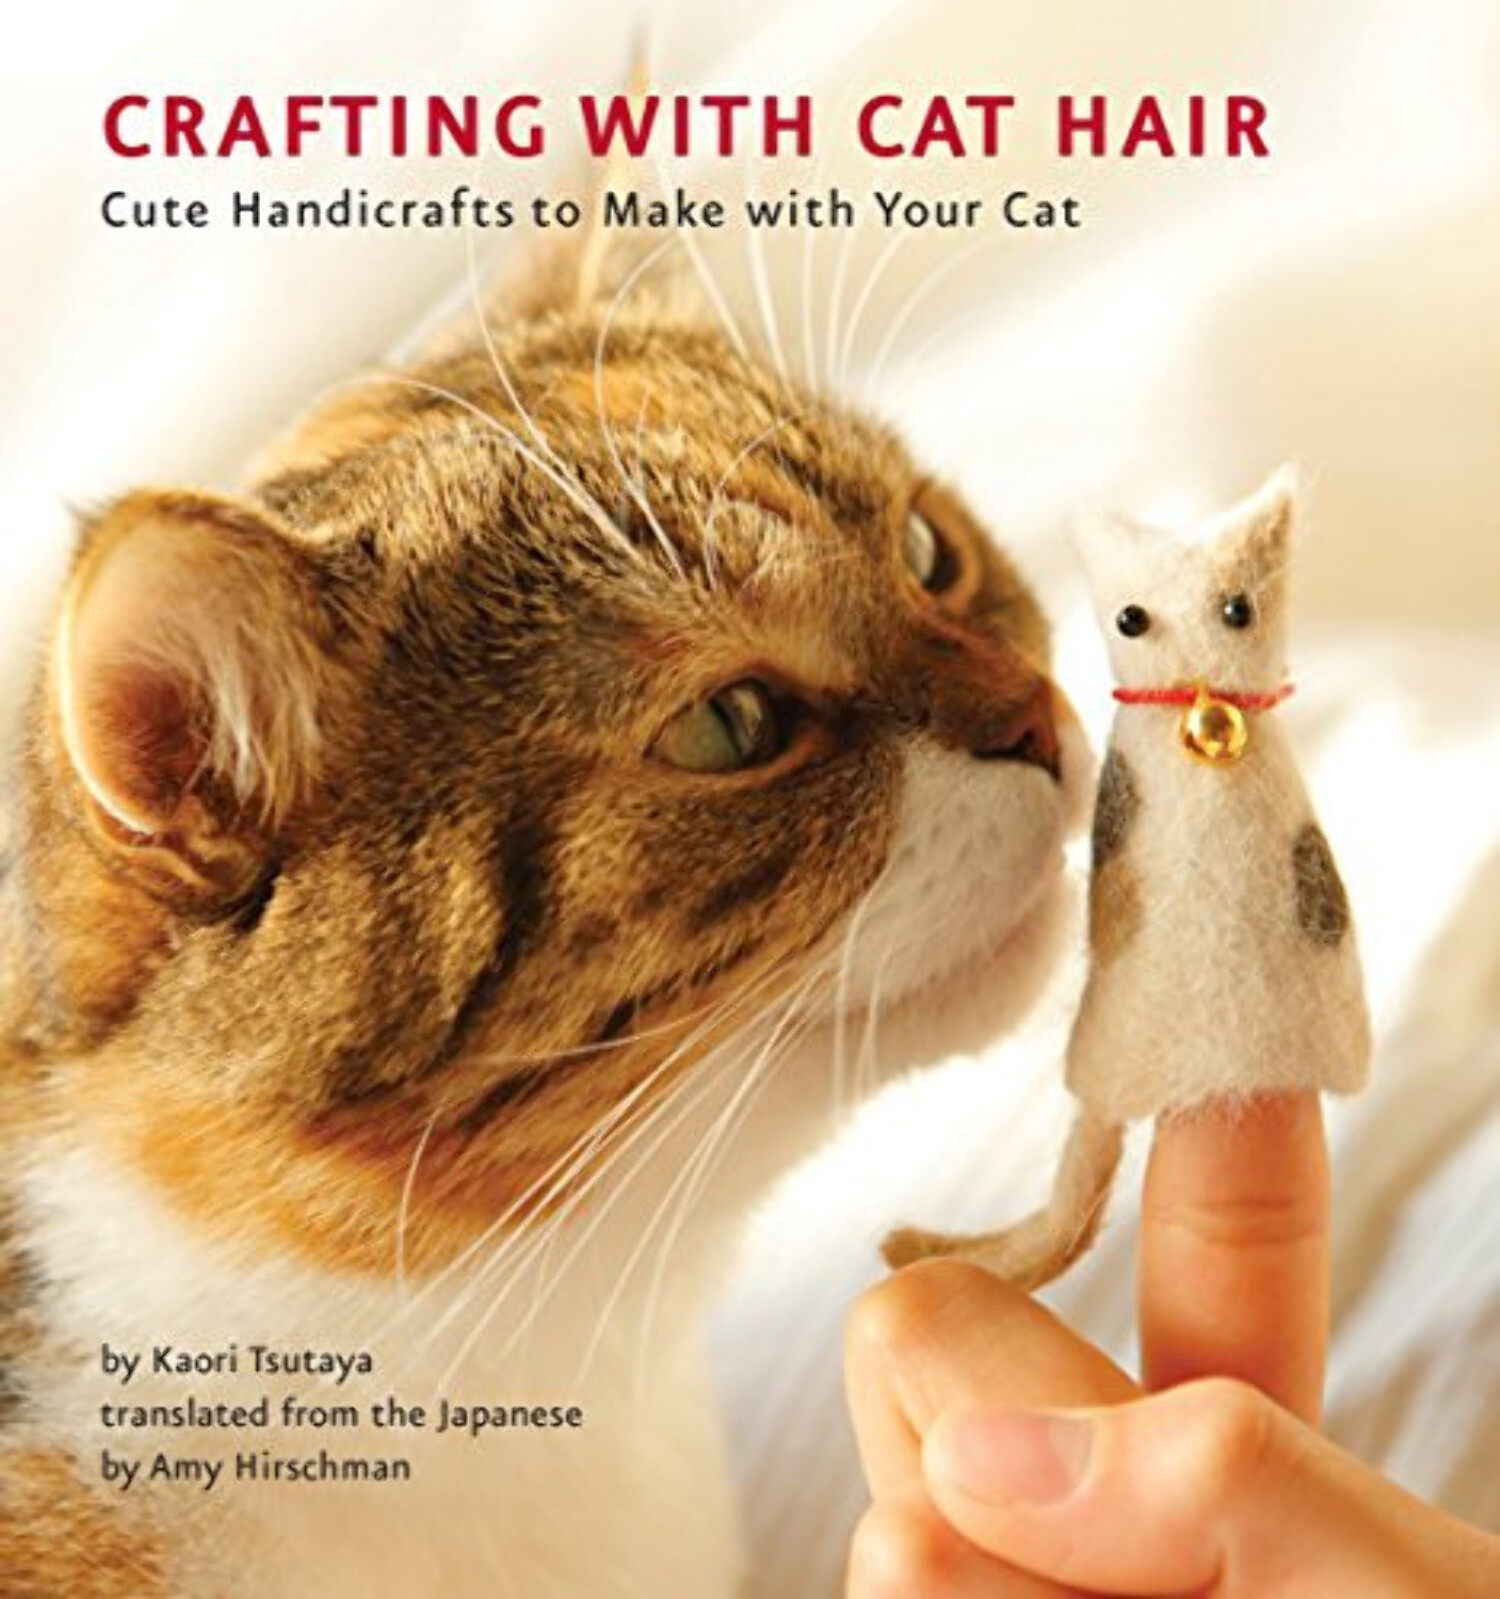 Crafting with Cat Hair : Cute Handicrafts to Make with Your Cat (Paperback) - image 1 of 1